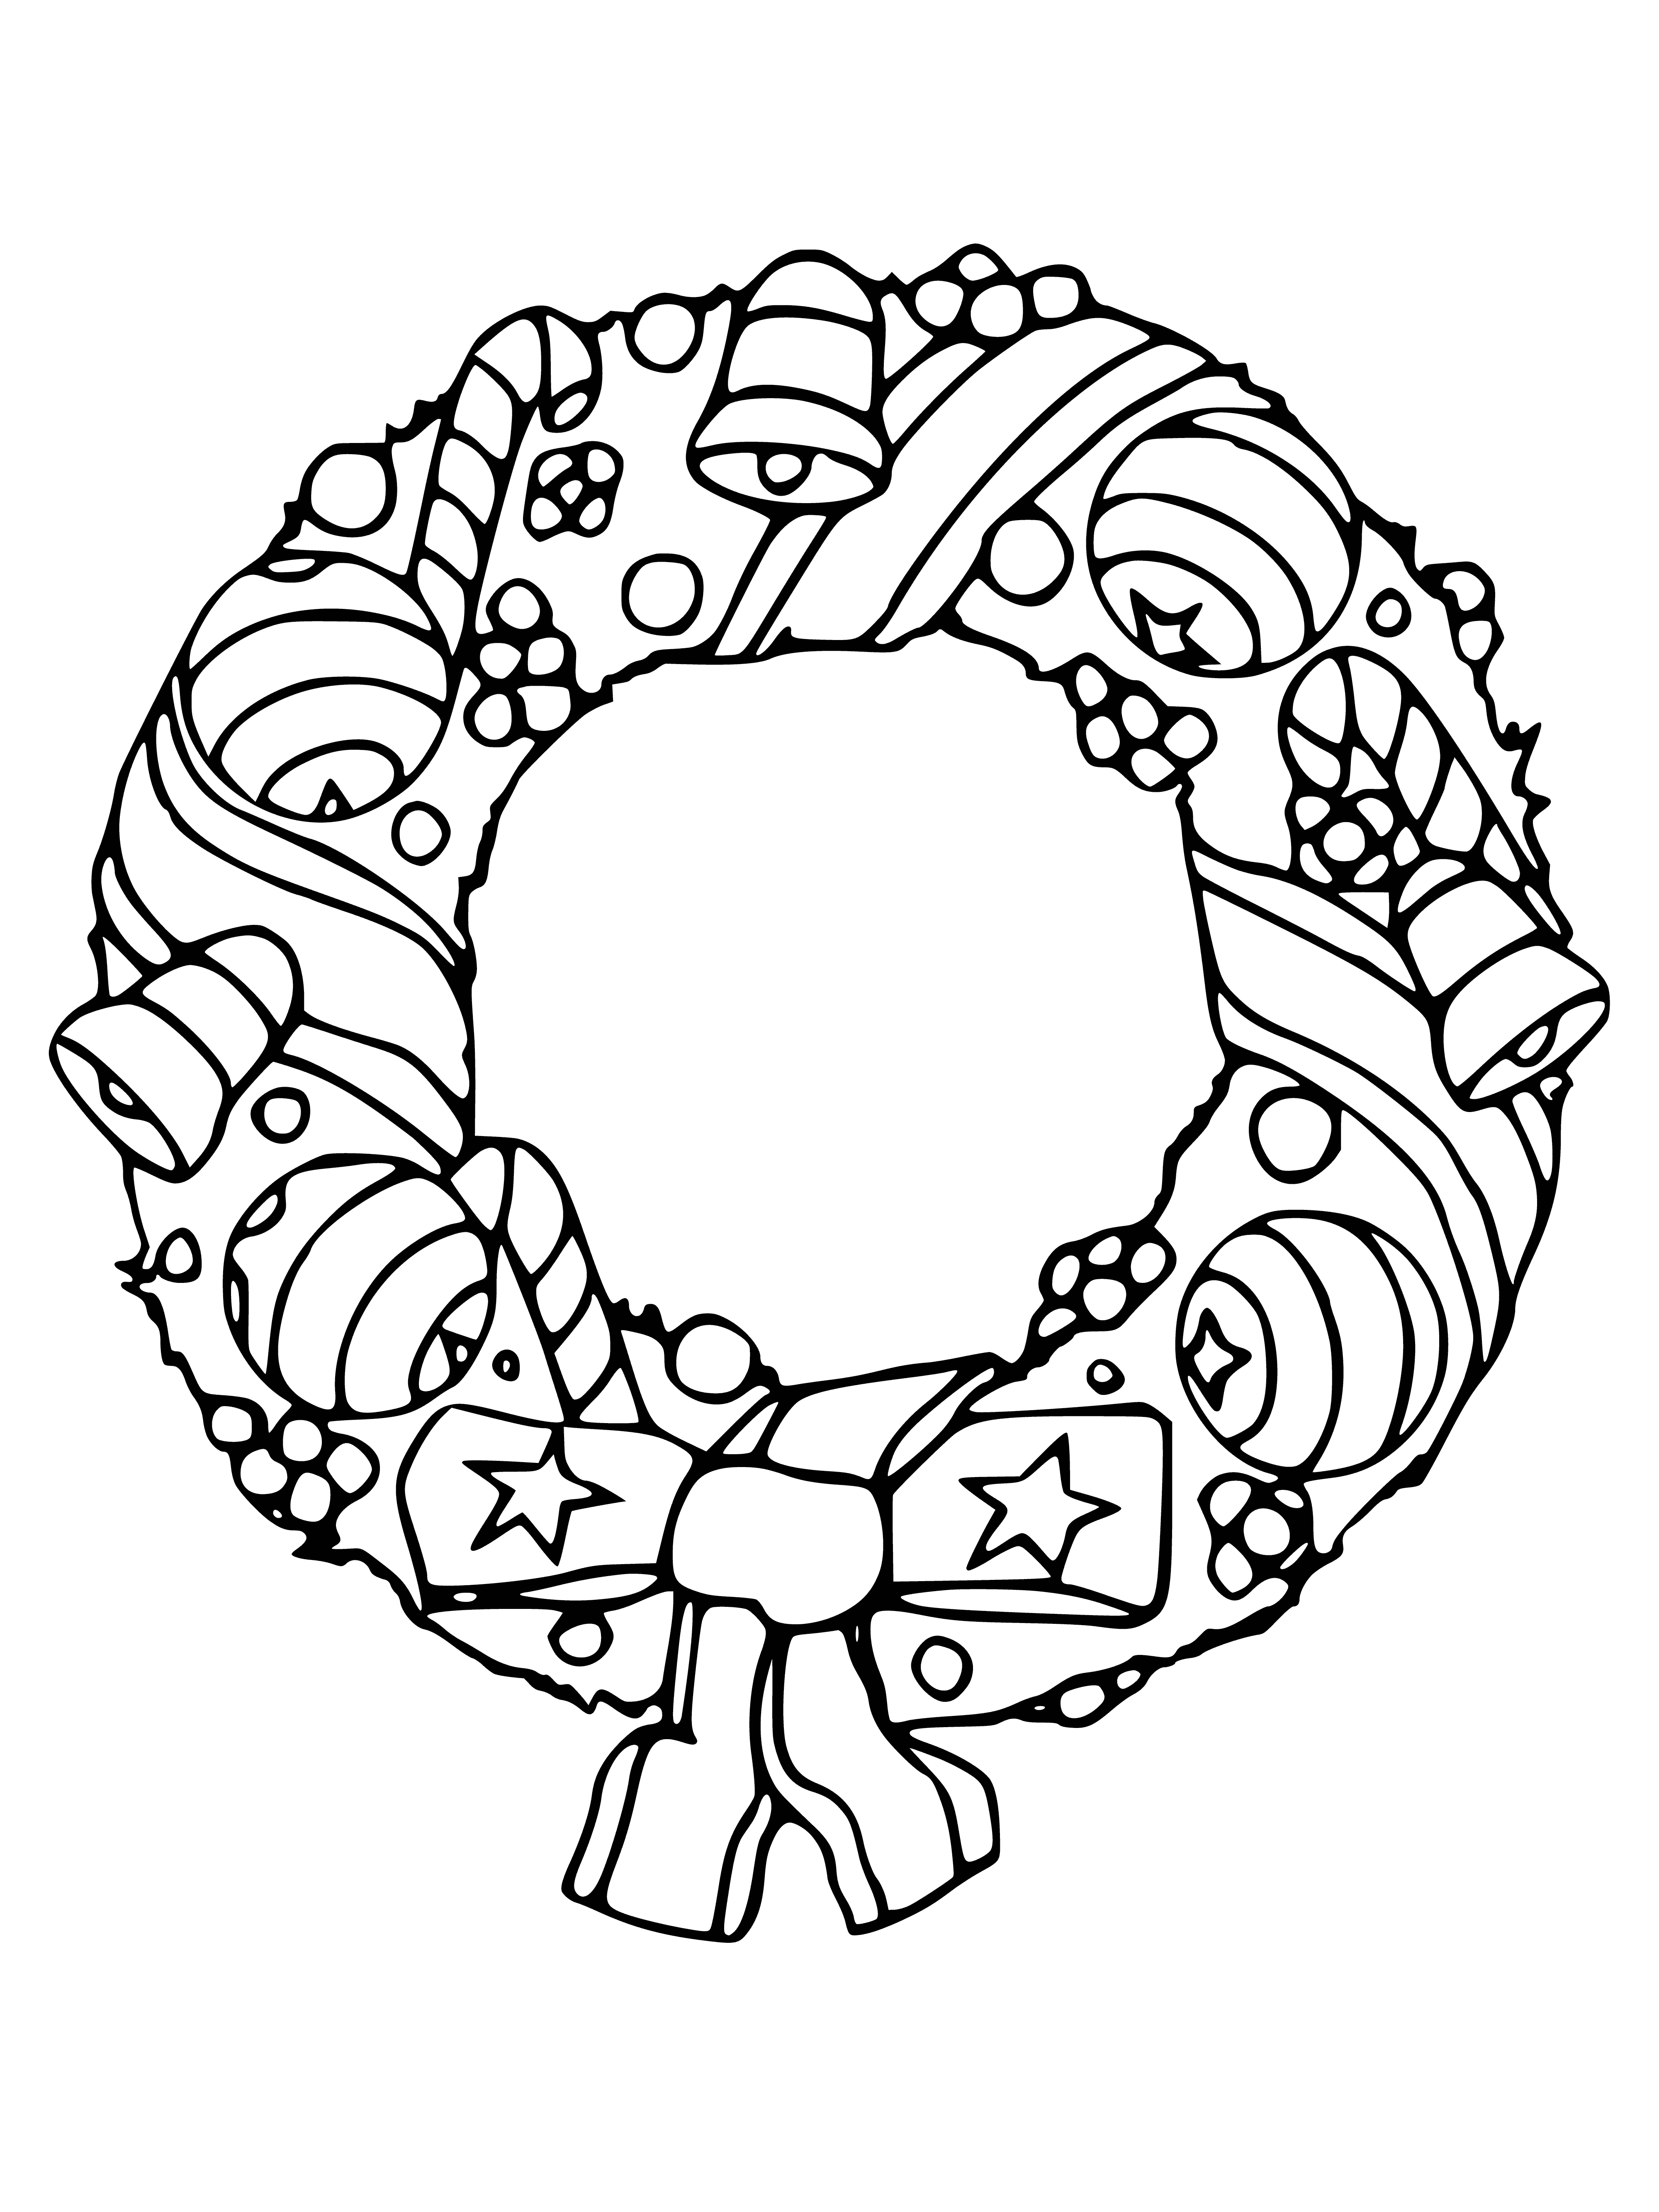 coloring page: A perfect addition to your holiday home. 

A festive evergreen wreath adorned with red berries and topped with a red bow - perfect for your holiday decorations!